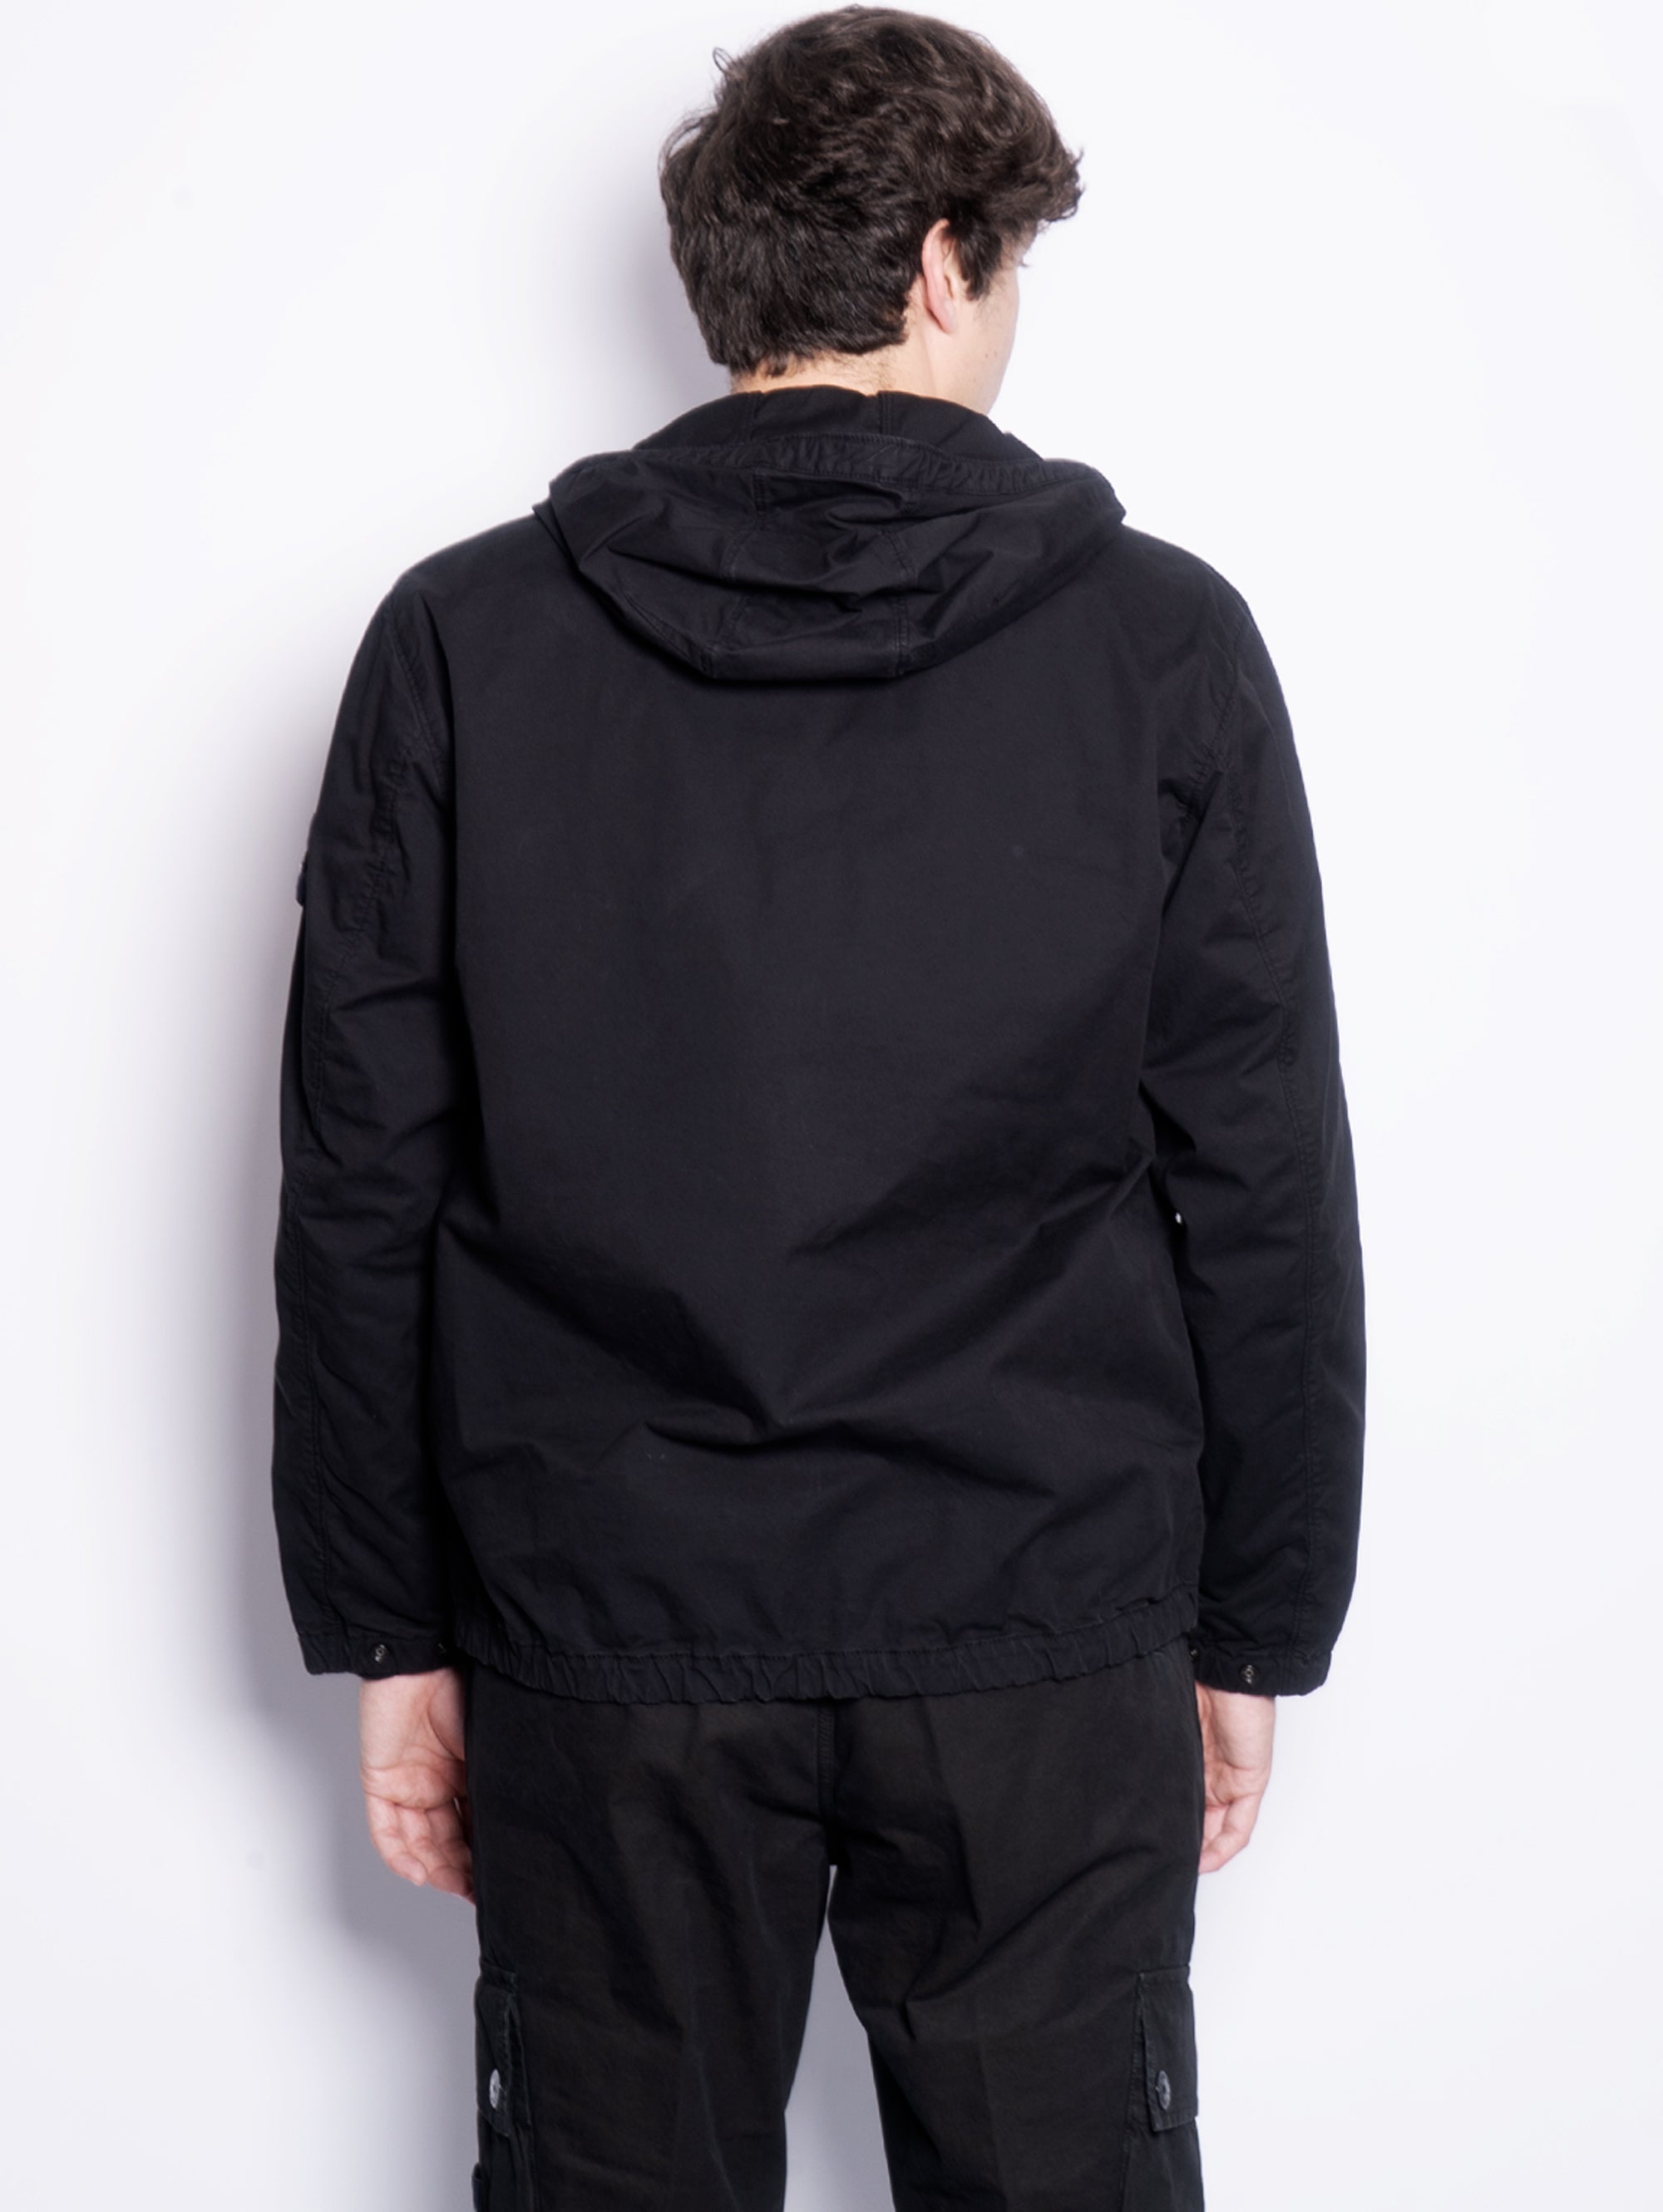 Jacket in Black Garment Dyed Supima Cotton Twill